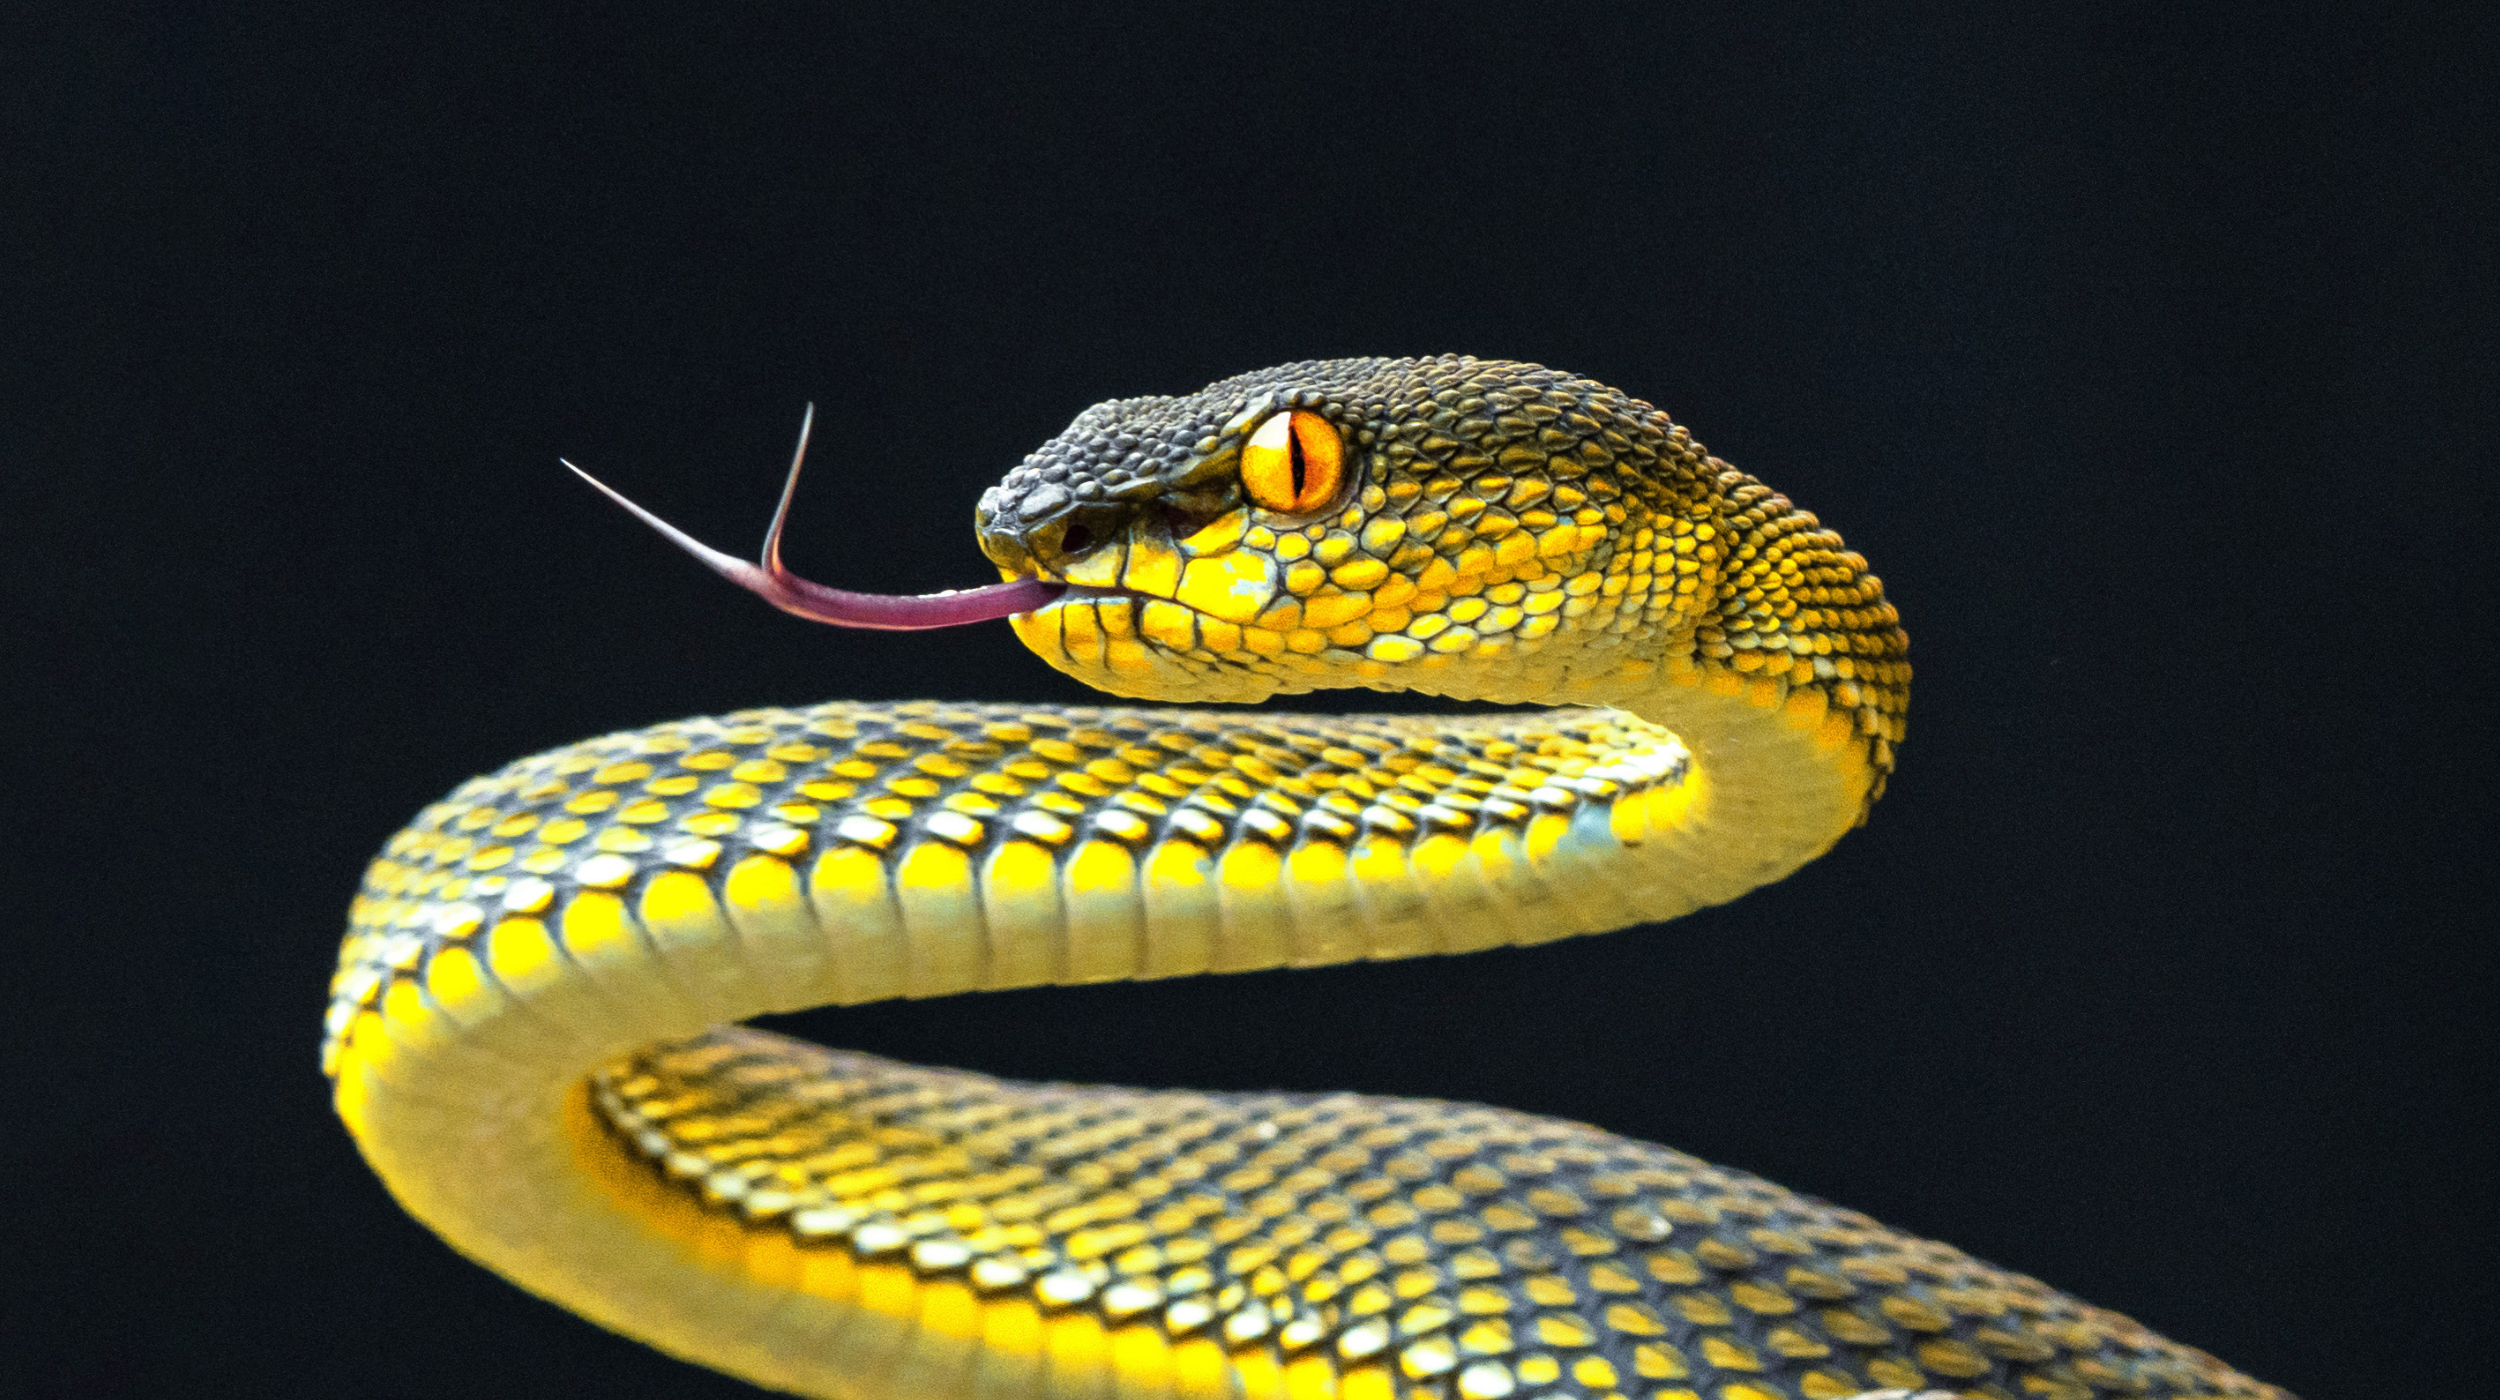 A yellow and black snake with a black background.